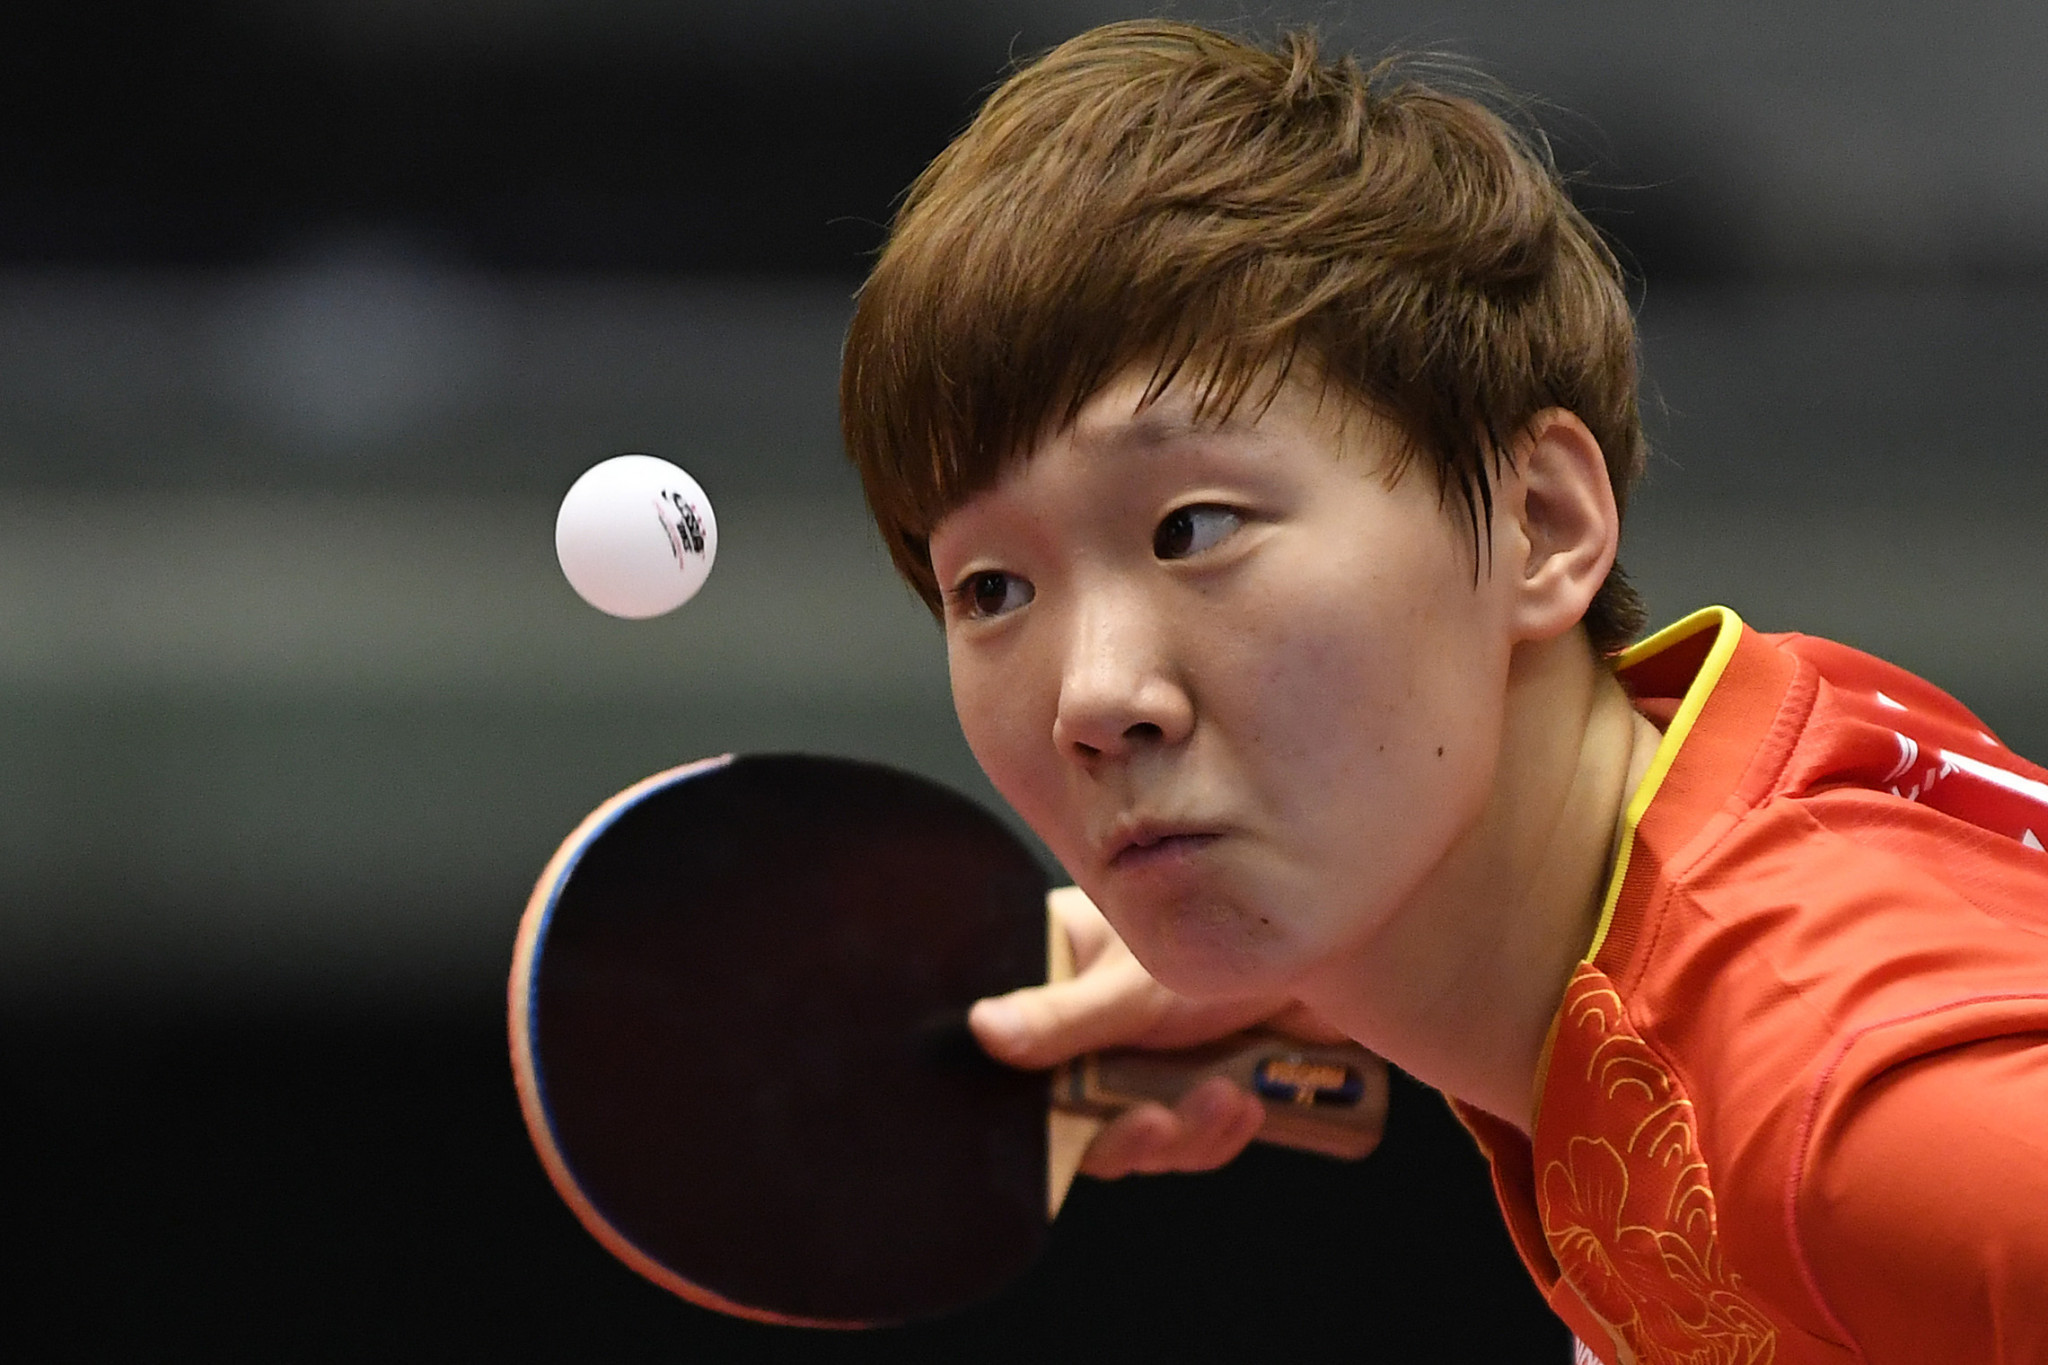 Wang Manyu defeats world number one and then defending champion to reach ITTF Hungarian Open final